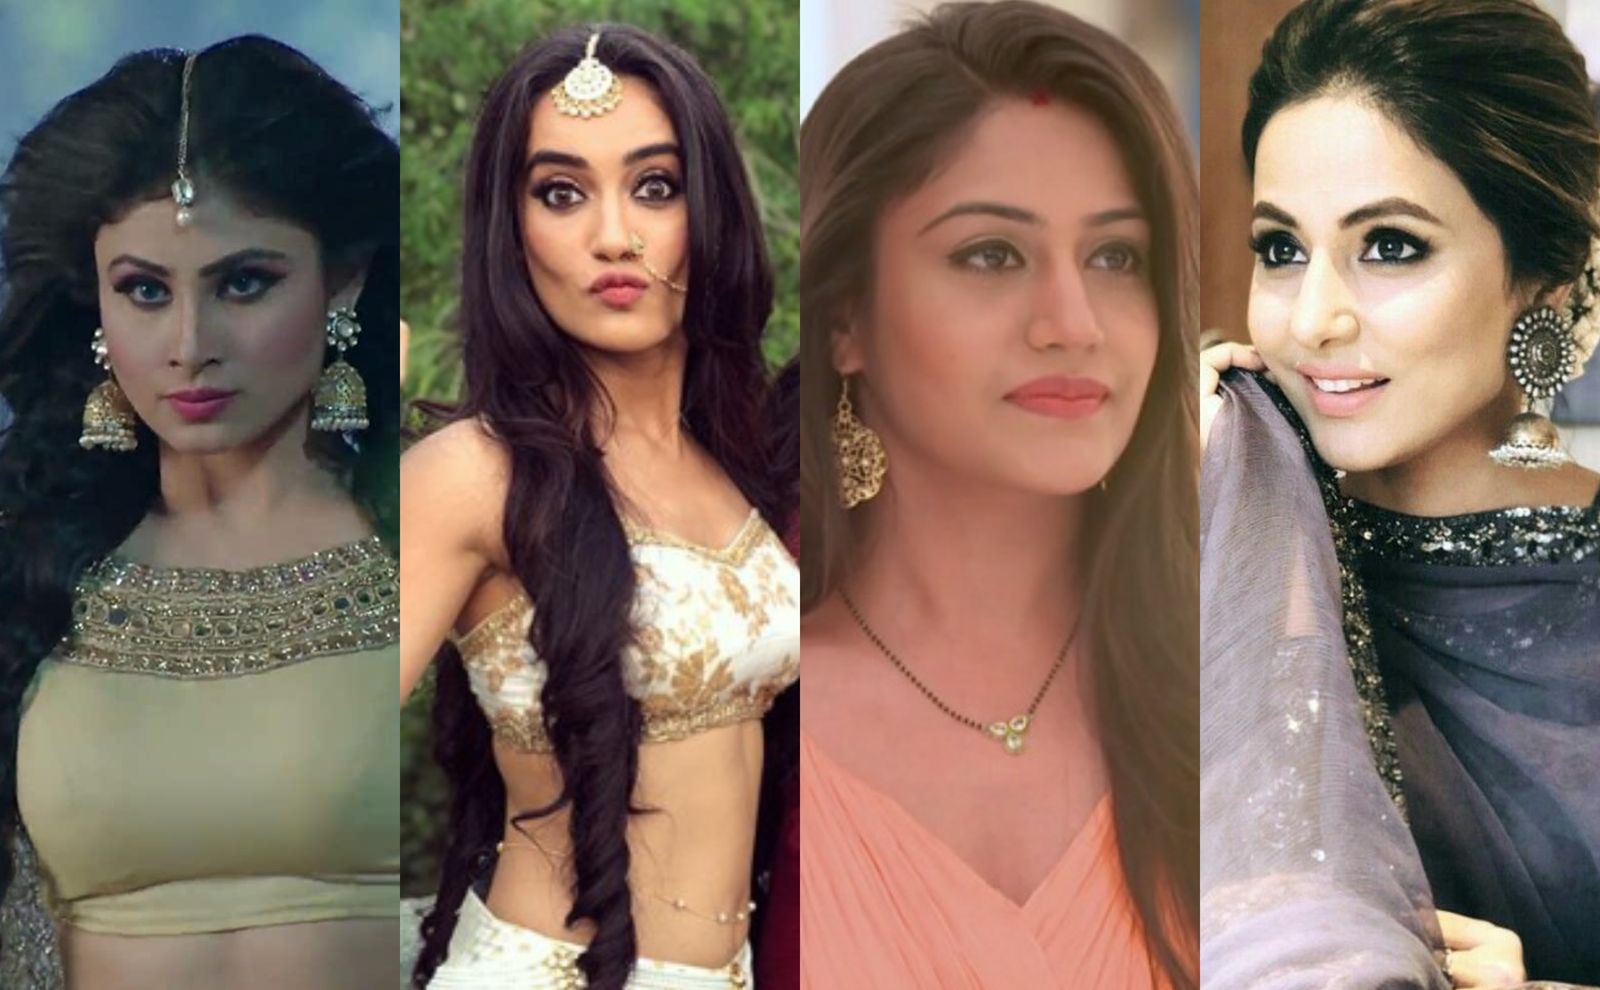 Mouni Roy And Surbhi Jyoti To Join Hina Khan, Surbhi Chandna In Naagin 5? Here’s What We Know